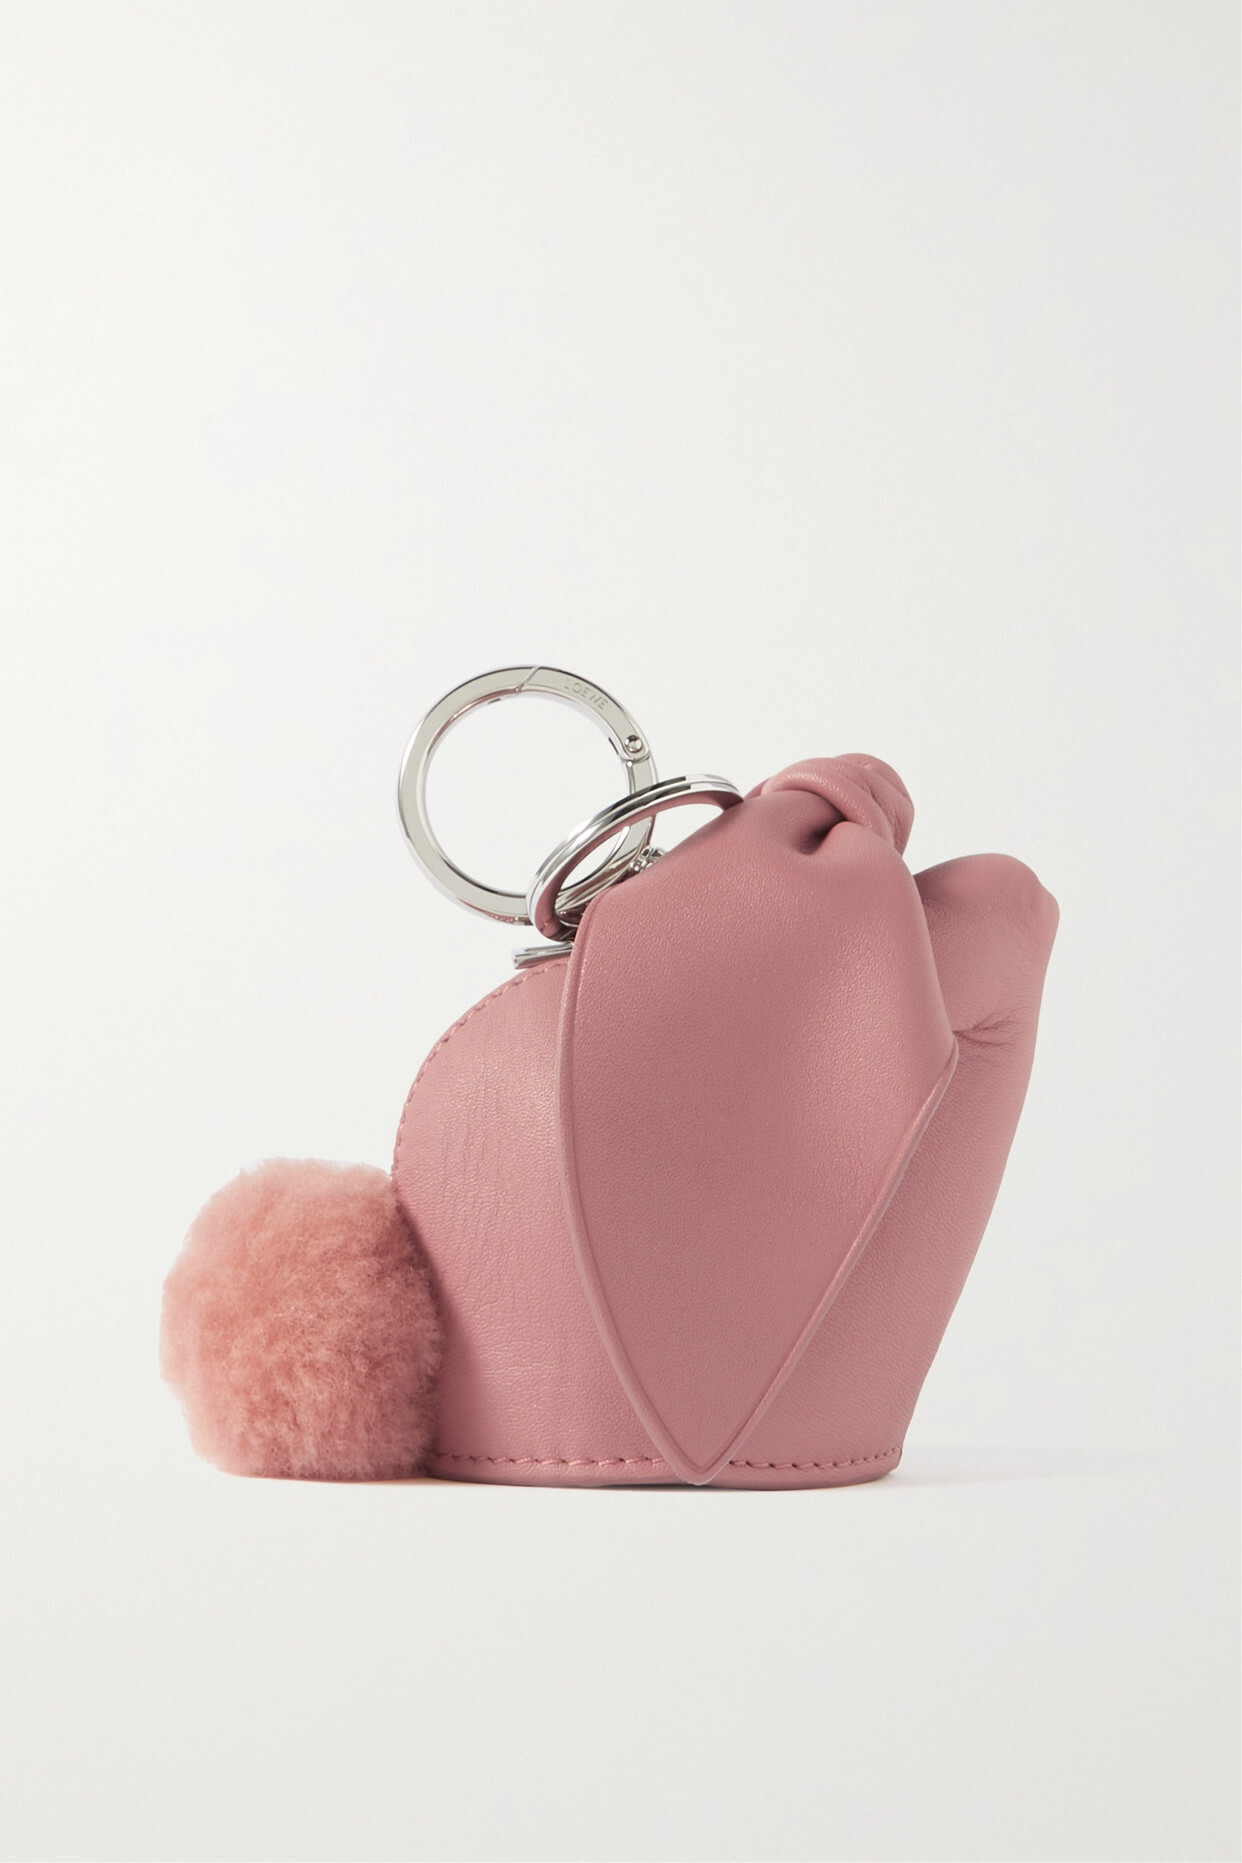 Loewe - Bunny Leather Coin Purse - Pink